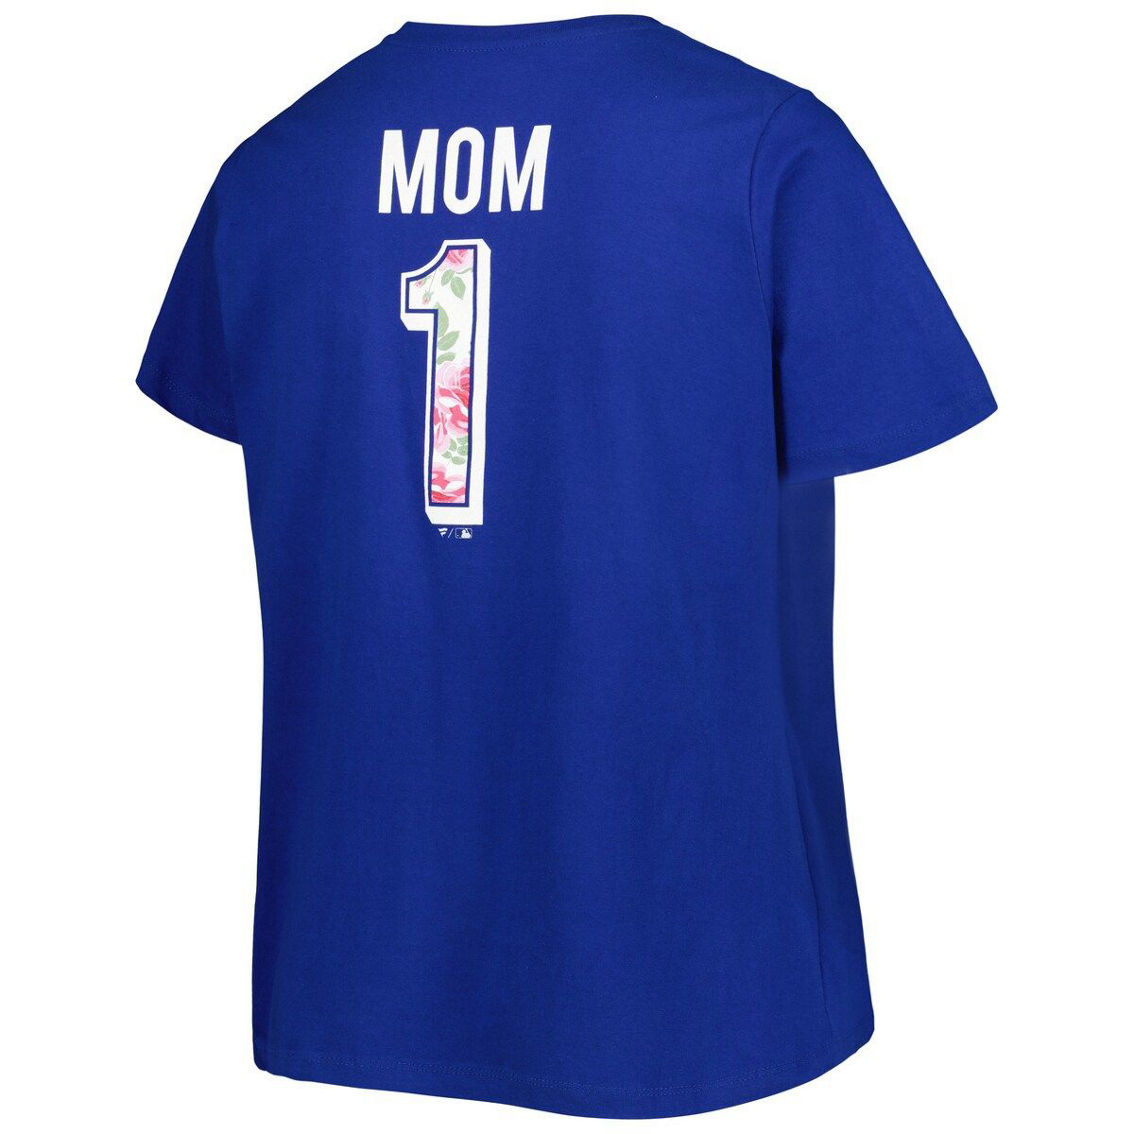 Profile Women's Royal Los Angeles Dodgers Mother's Day Plus Size Best Mom Ever V-Neck T-Shirt - Image 4 of 4